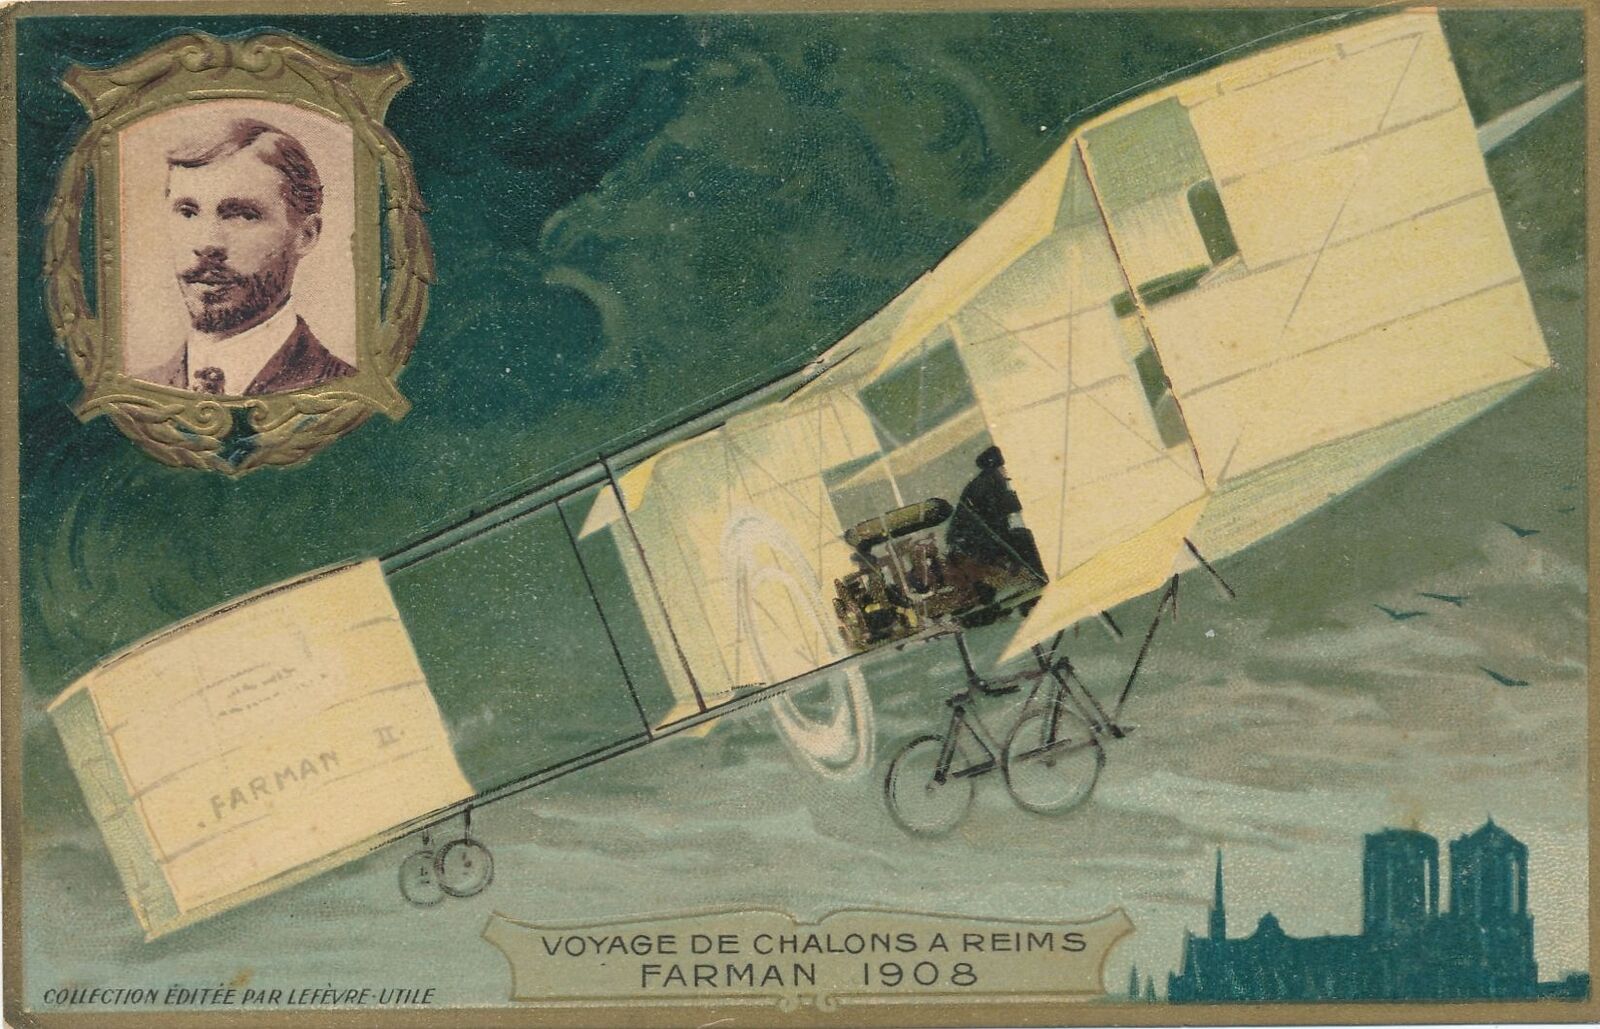 Henry Farman - French Aviation Pioneer and Aircraft Builder Postcard